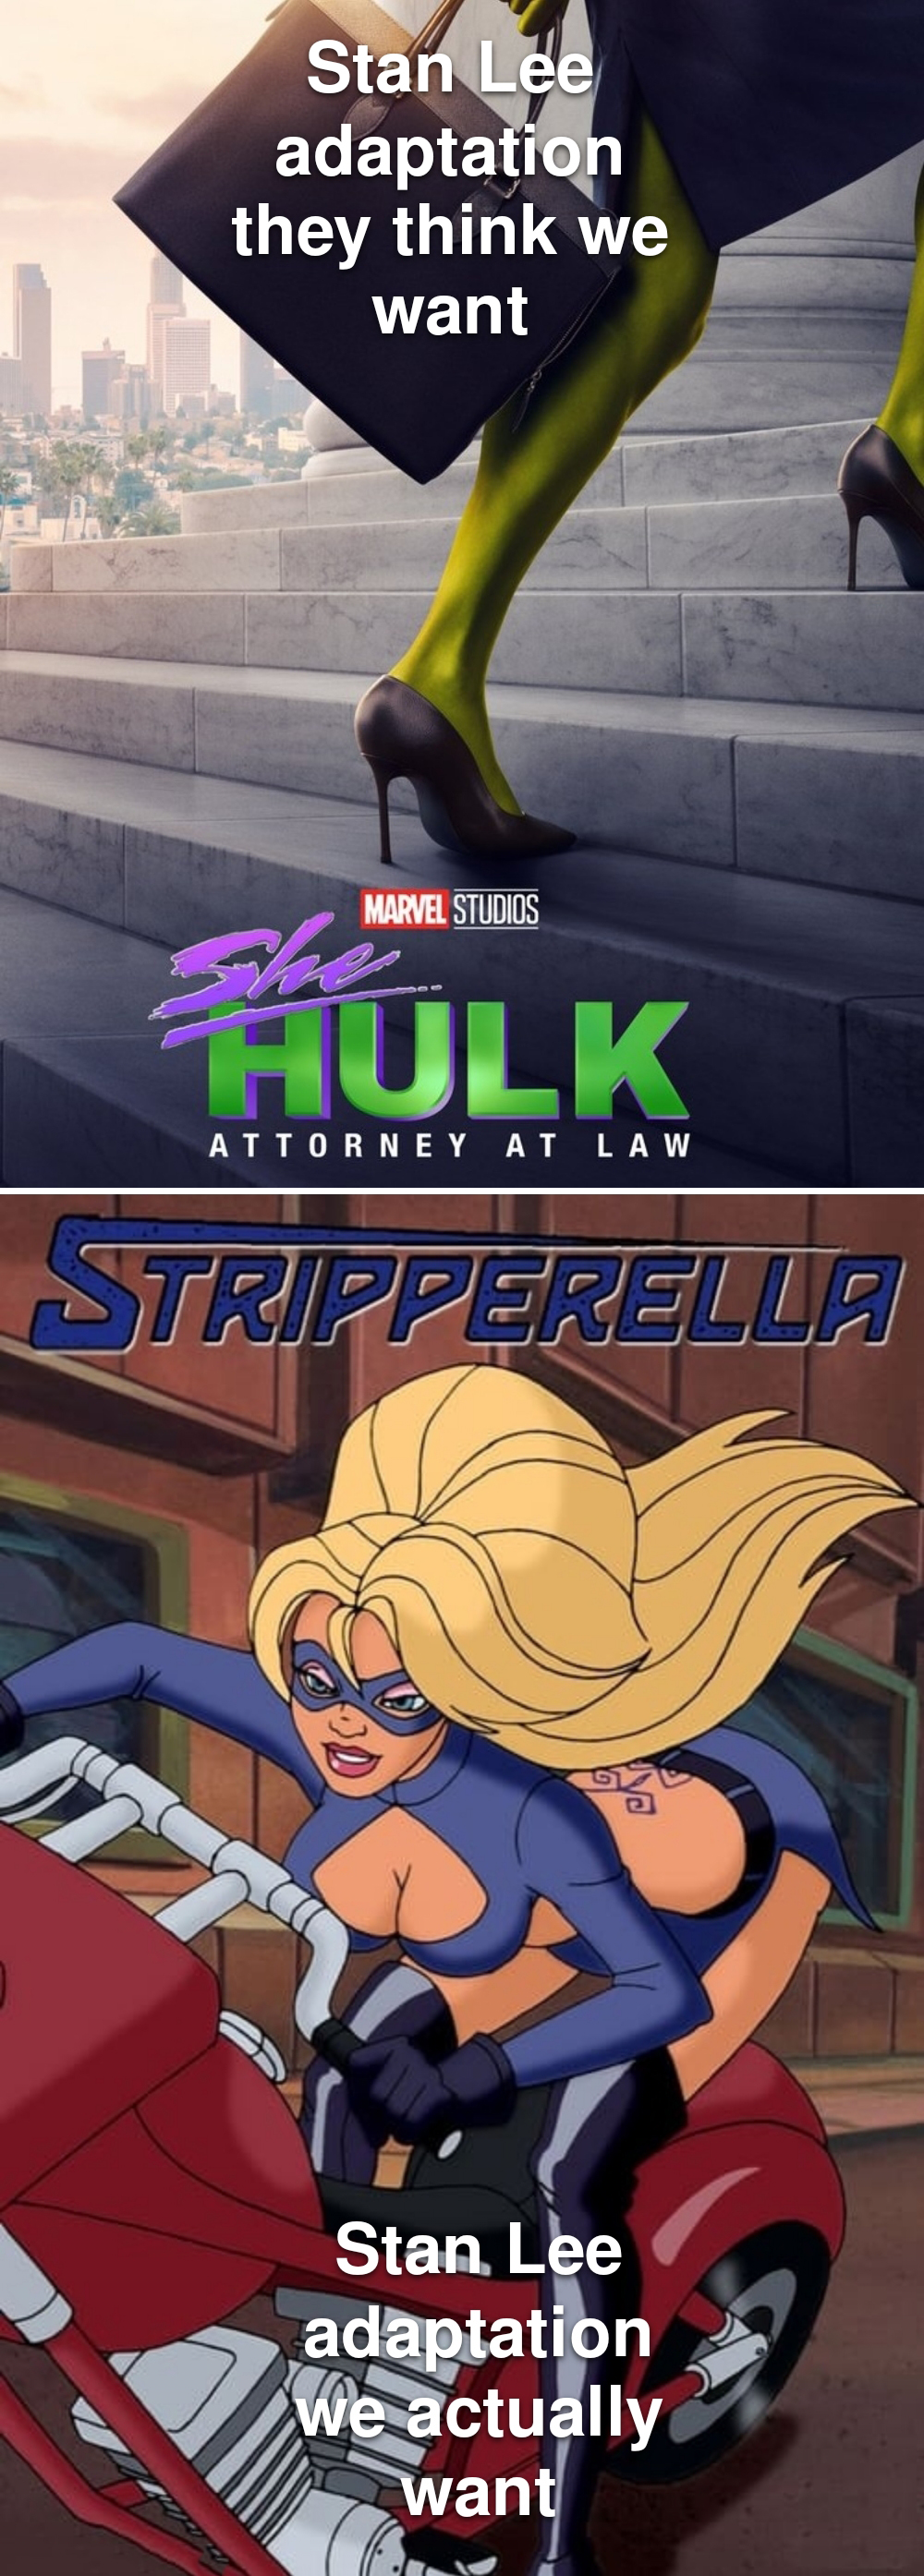 striparella show - Stan Lee adaptation they think we want Marvel Steks Shee Hulk Attorney At Law Stripperella Stan Lee adaptation we actually want